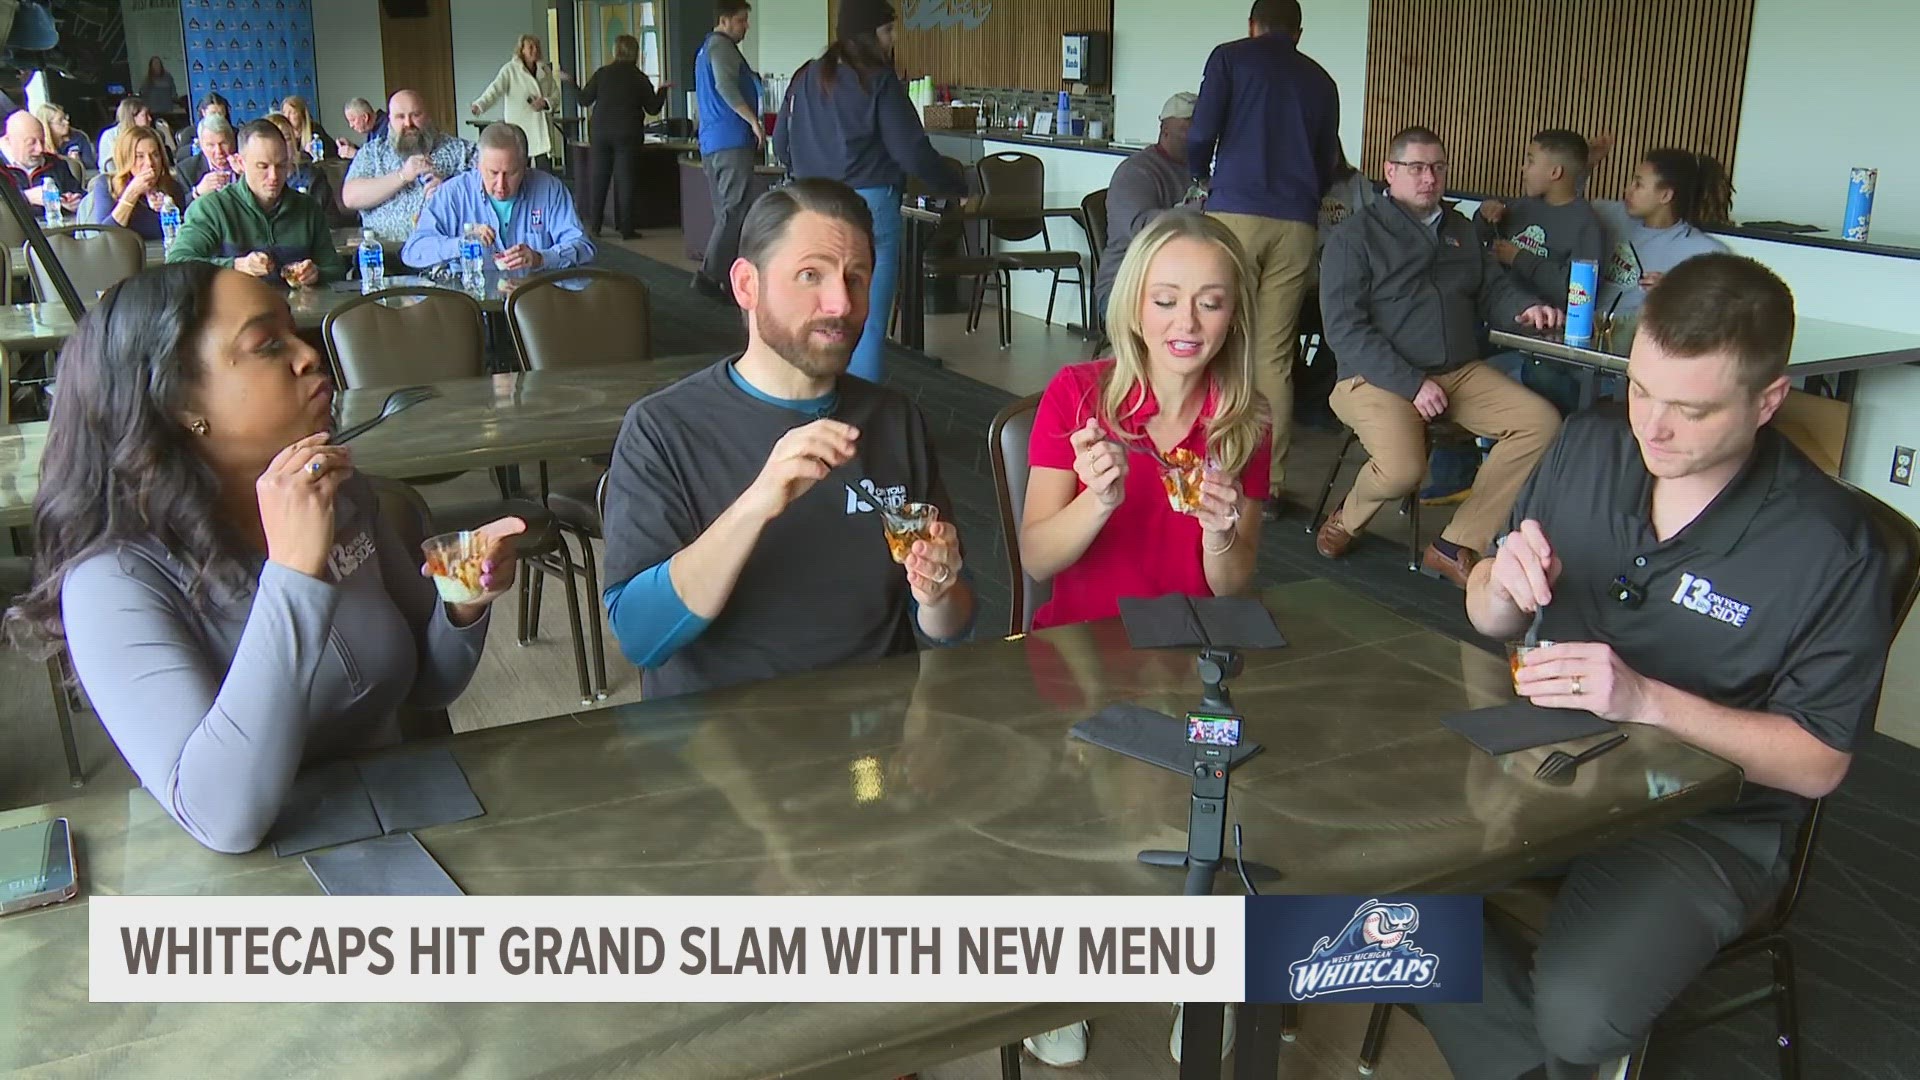 13 ON YOUR SIDE got a chance to try LMCU Ballpark's new menu ahead of opening day.